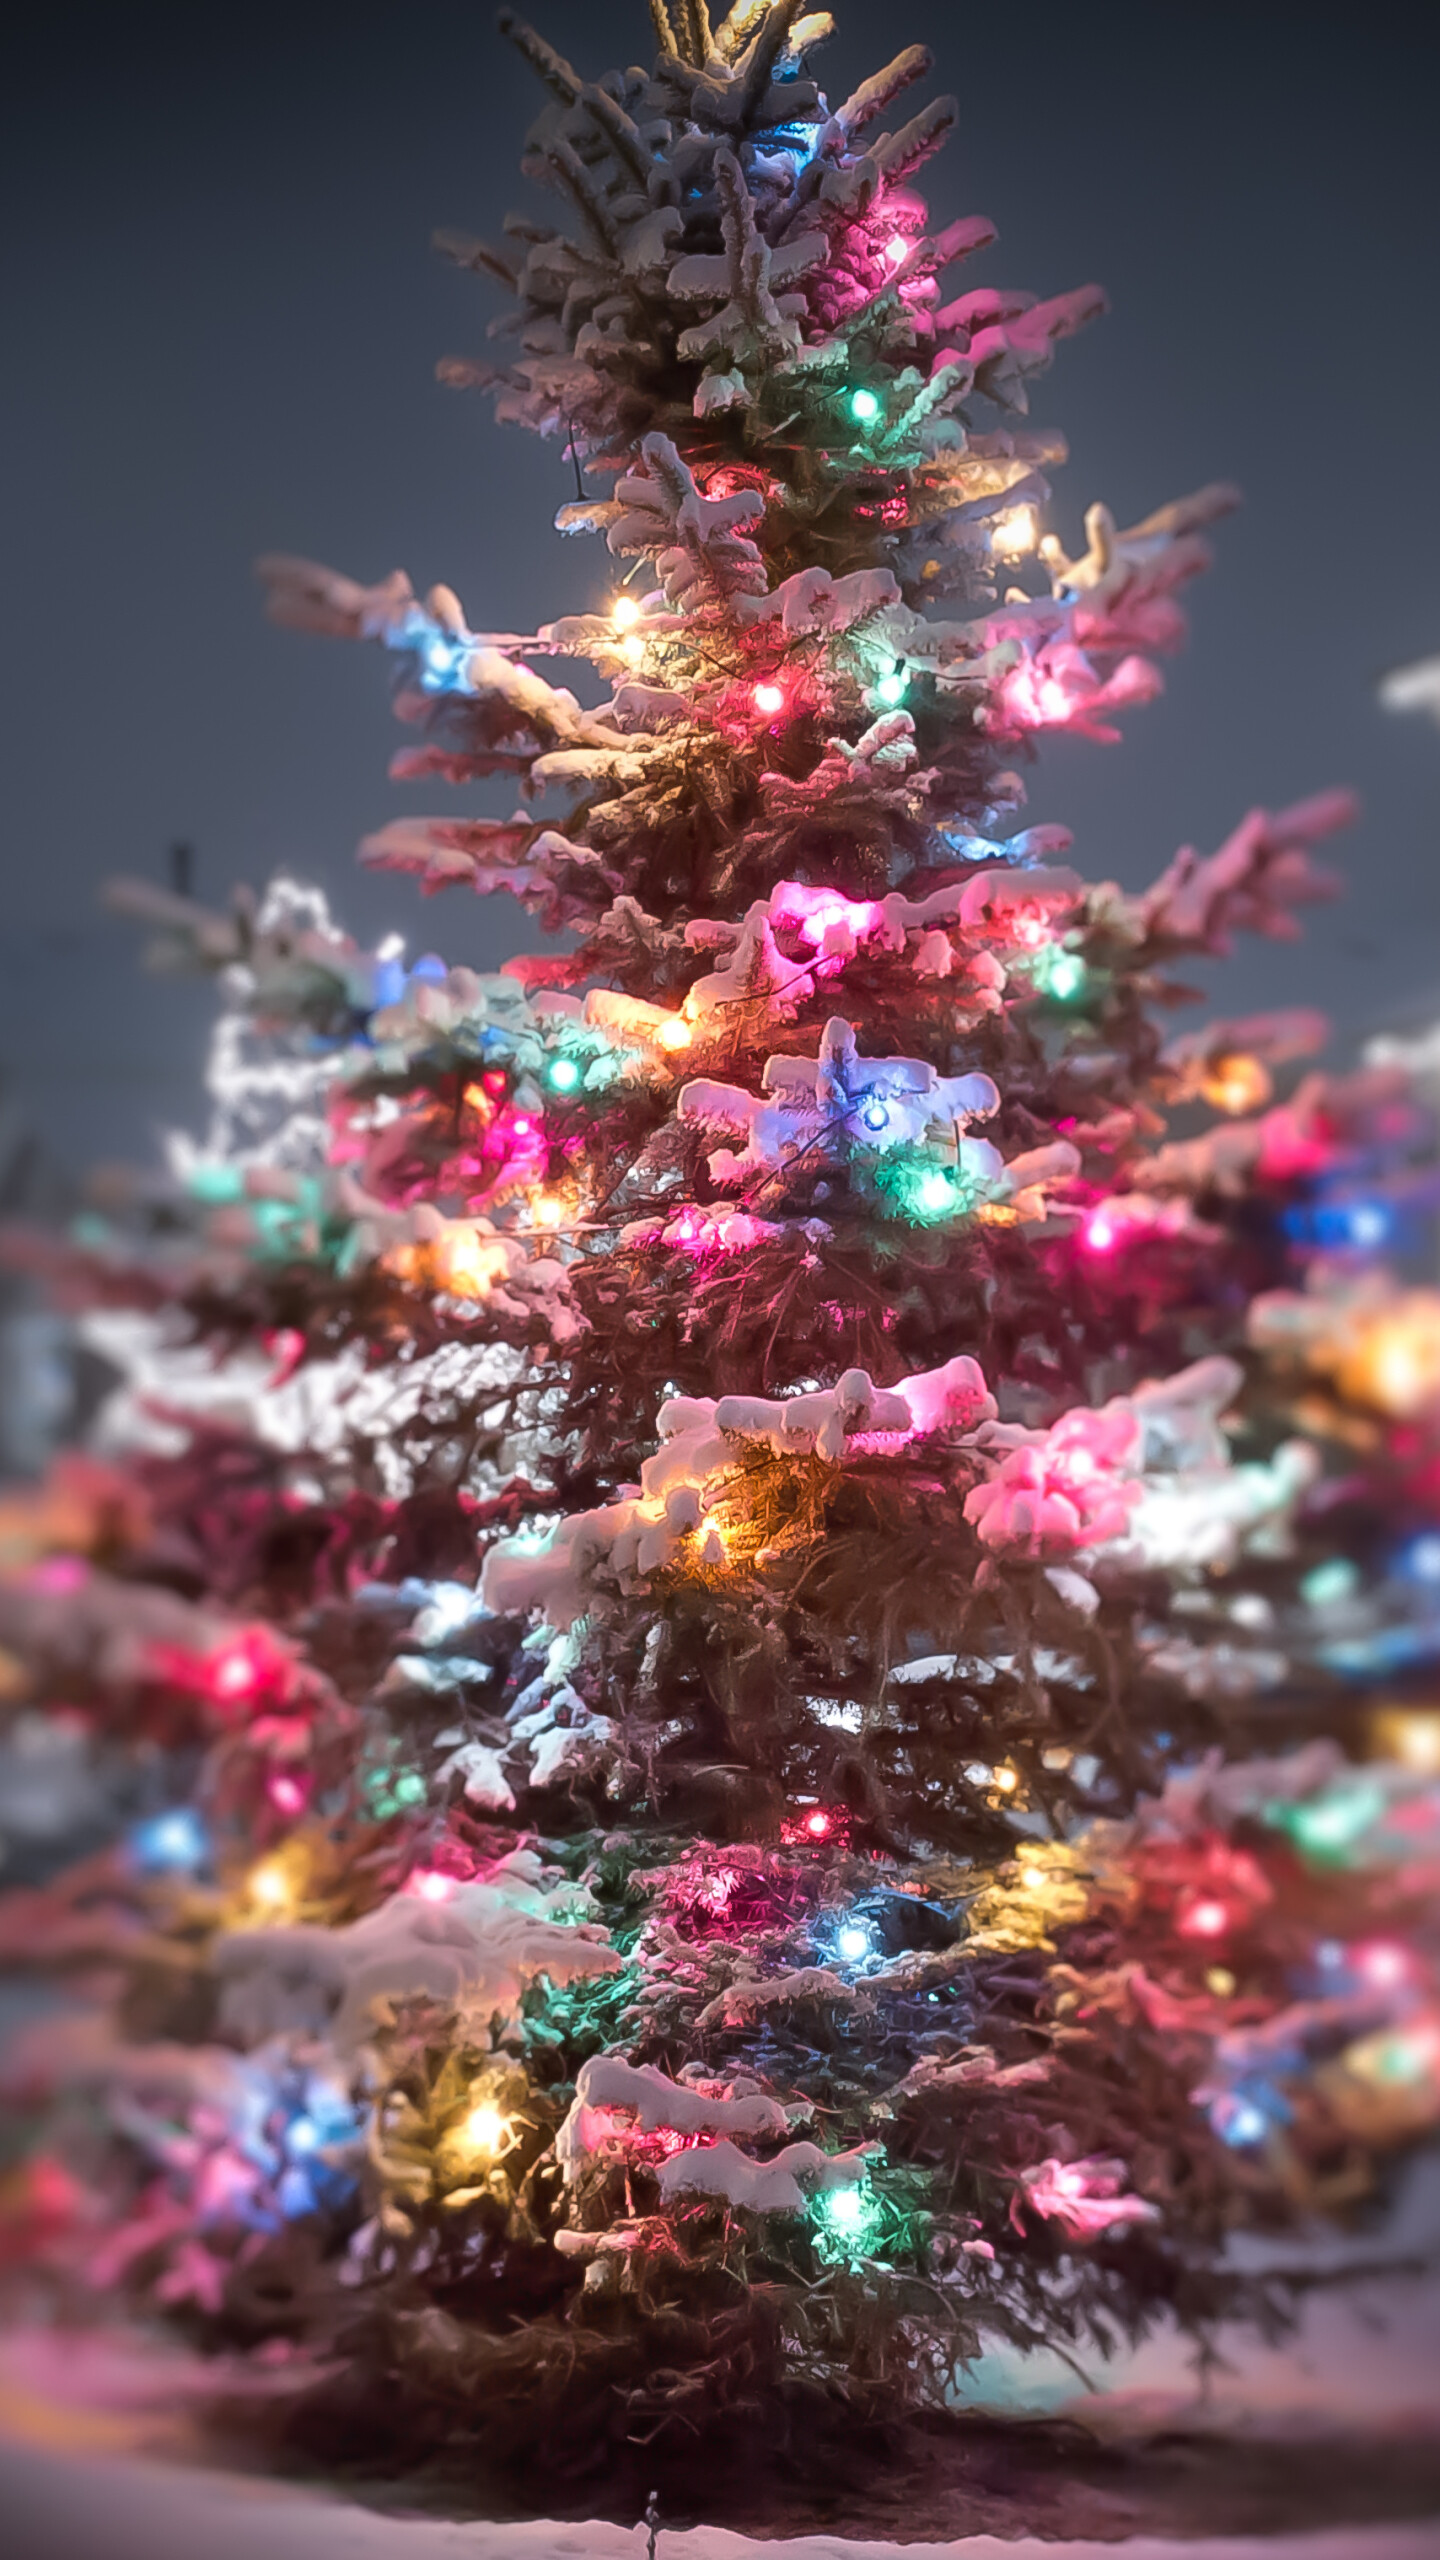 Christmas Lights: Among the most recognized forms of holiday decoration. 1440x2560 HD Background.